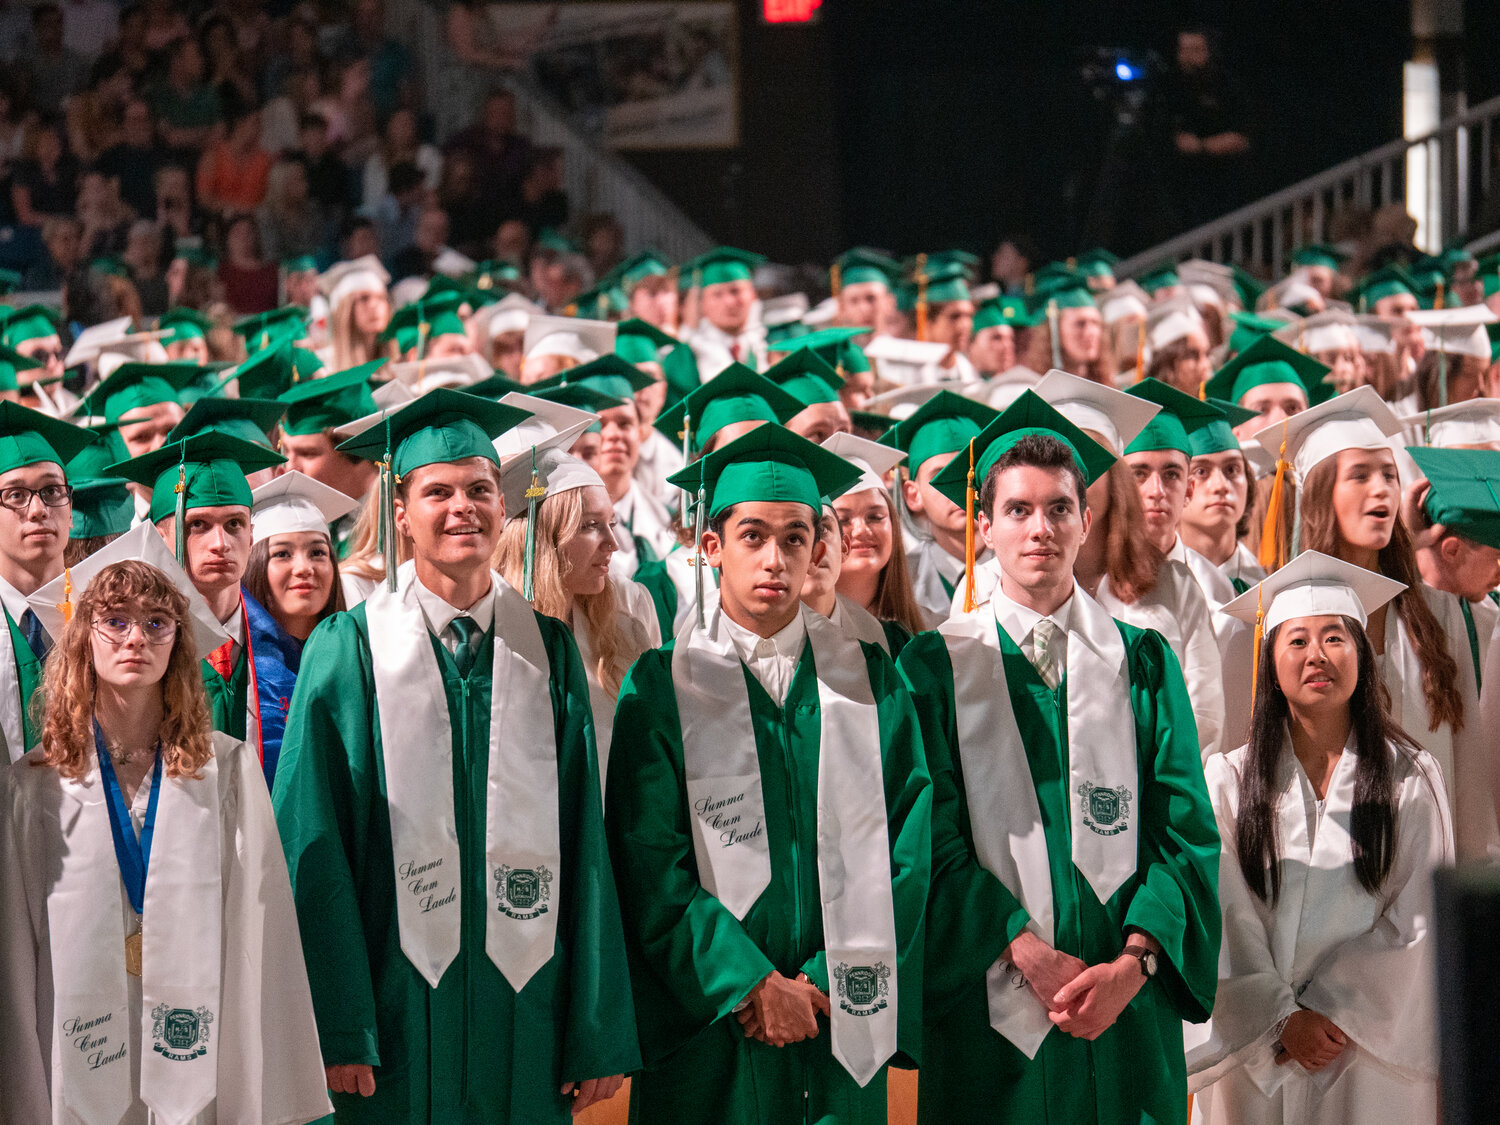 The Pennridge High School Class of 2023 stands at attention during Tuesday's commencement prior to turning their tassels to the left side, signifying their transition to graduates.